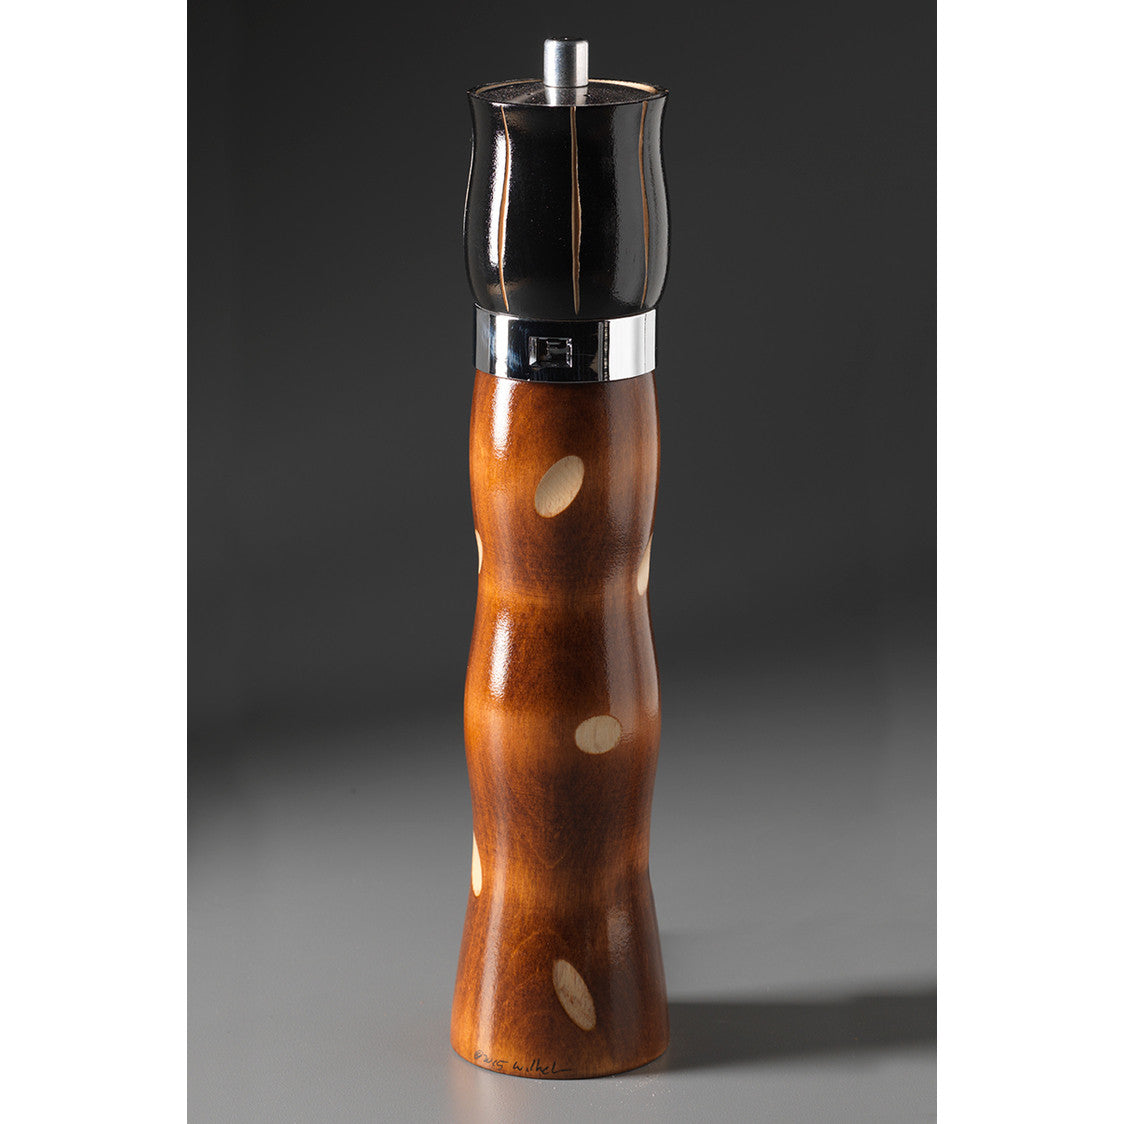 https://www.sweetheartgallery.com/cdn/shop/products/Raw-Design-Brown-and-Black-Wooden-Salt-Shaker-and-Pepper-Mill-Grinder-Combo-C-12-by-Robert-Wilhelm-Artistic-Designer-Salt-and-Pepper-Shakers.jpeg?v=1590171939